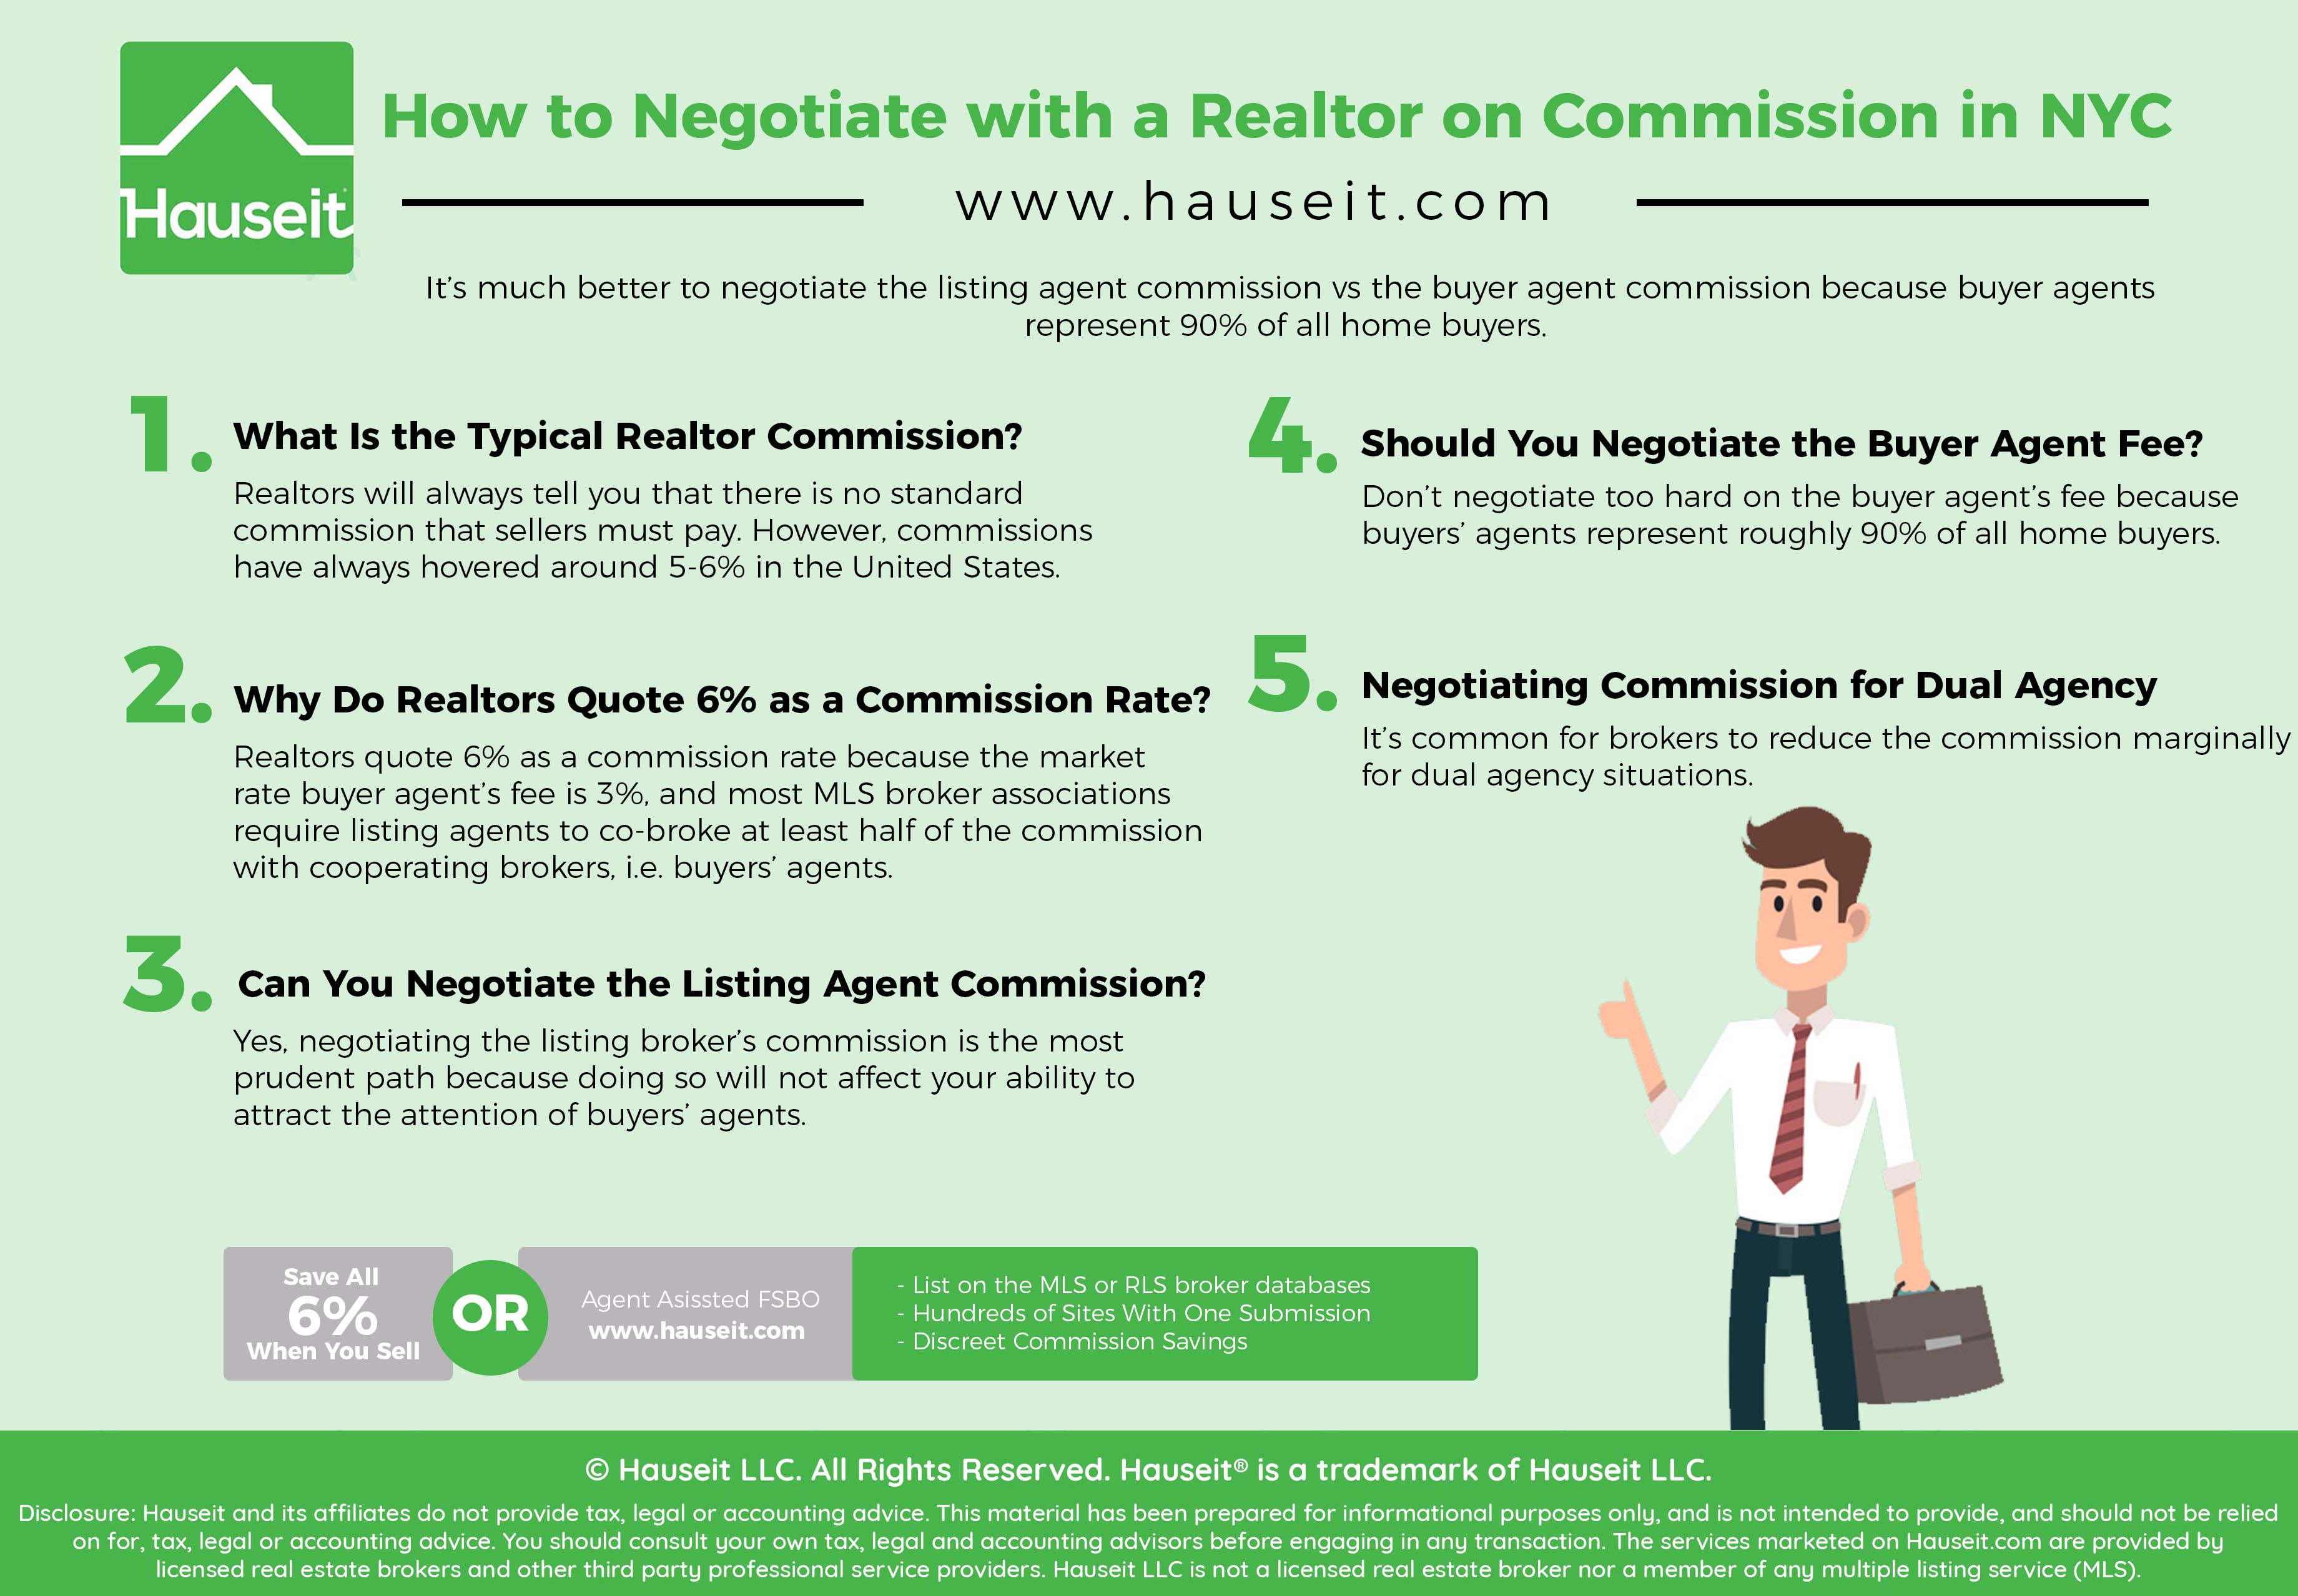 How to Negotiate with a Realtor on Commission in NYC